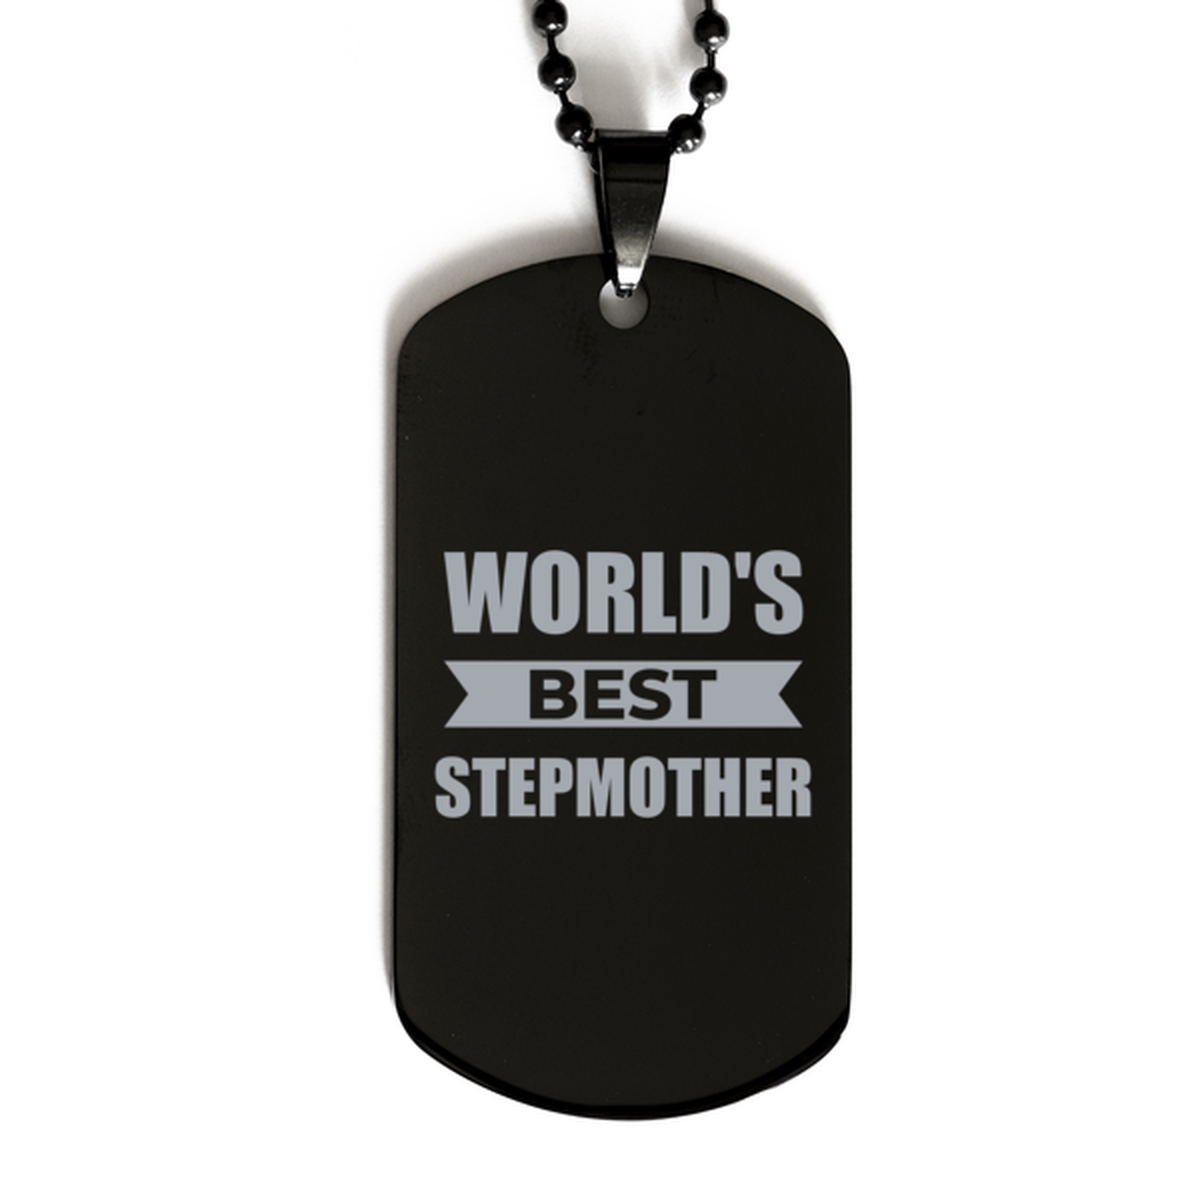 Worlds Best Stepmother Gifts, Funny Black Engraved Dog Tag For Stepmother, Birthday Presents For Women